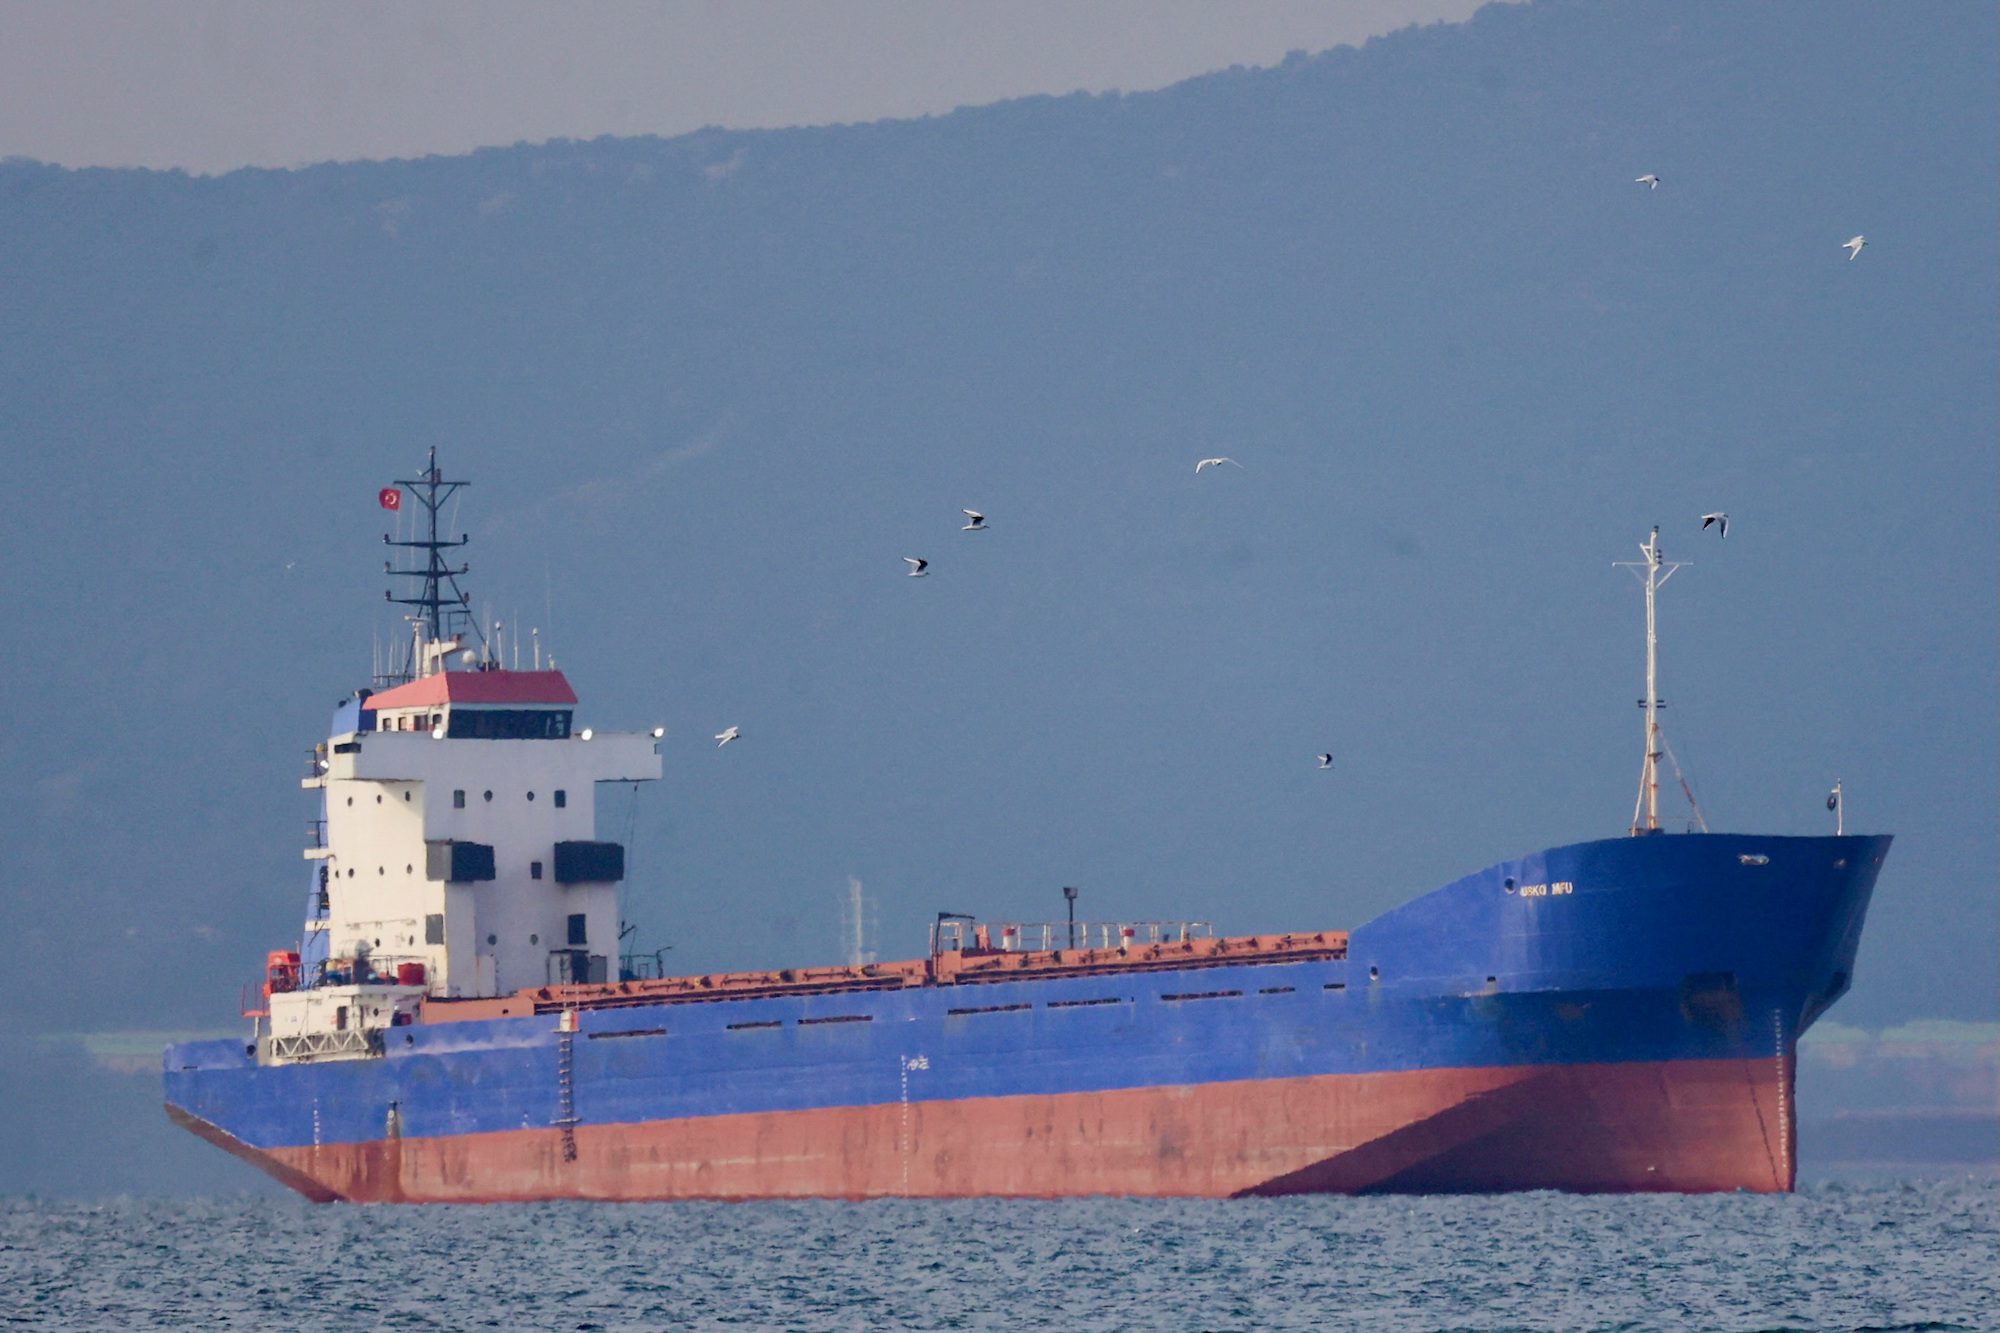 Cameroon-flagged small bulker USKO MFU is pictures in Tuzla anchorage, east Istanbul, Turkey, November 30, 2023. REUTERS/Yoruk Isik